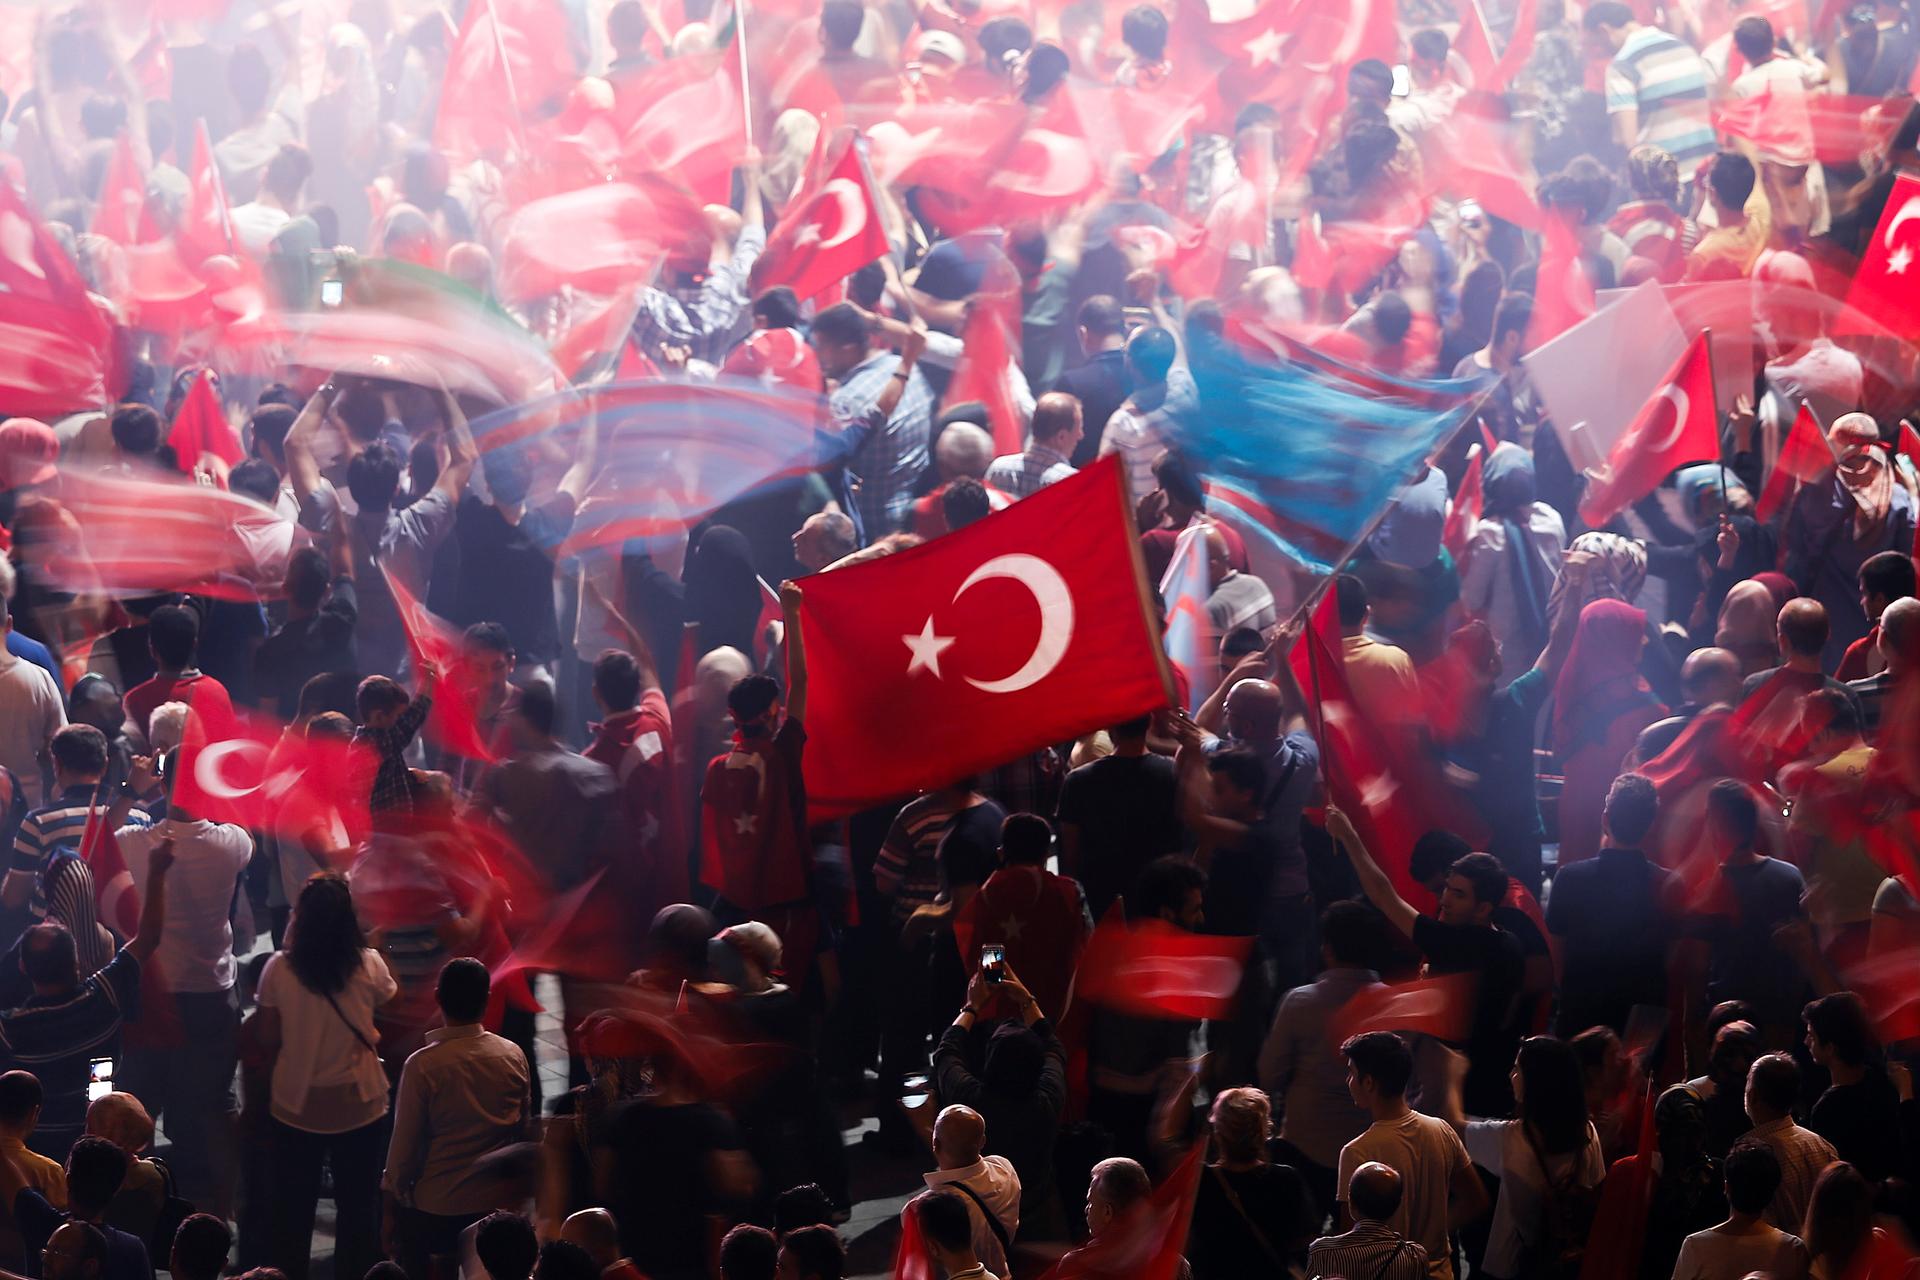 Supporters of Turkish President Tayyip Erdogan wave Turkish national flags during a pro-government demonstration on Taksim square in Istanbul, Turkey, July 19, 2016.